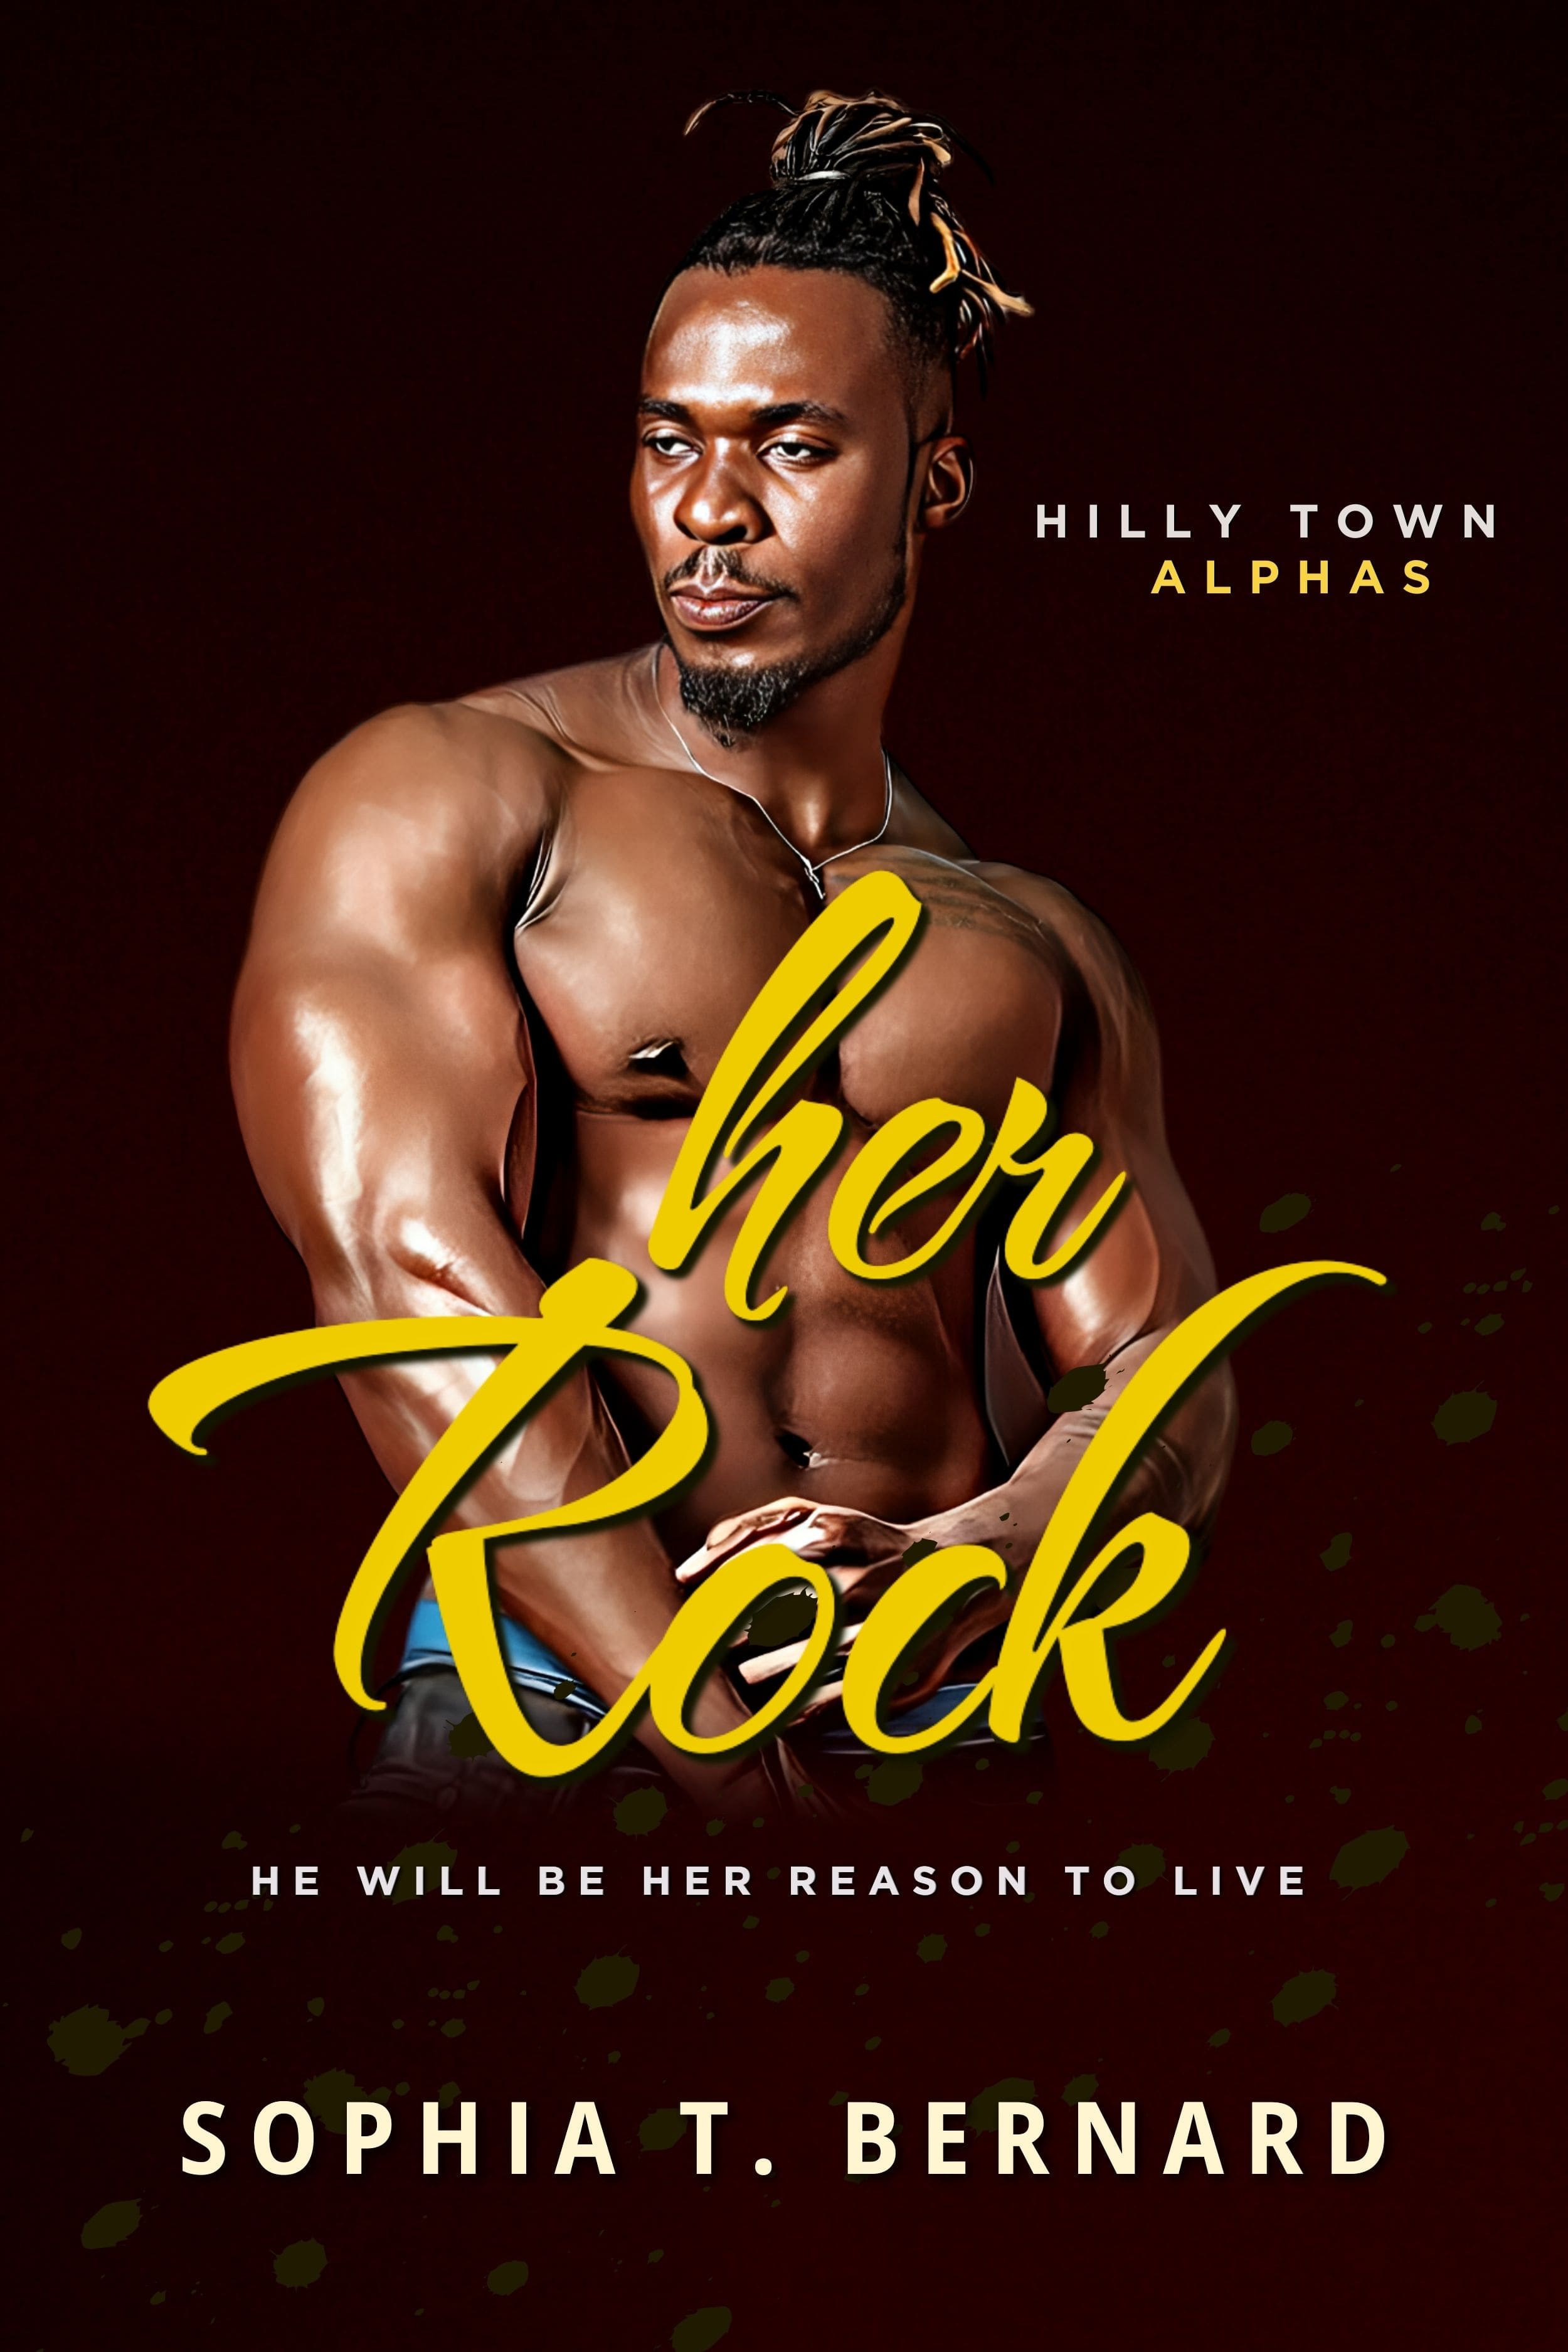 Her-Rock-(Hilly-Town-Alphas)